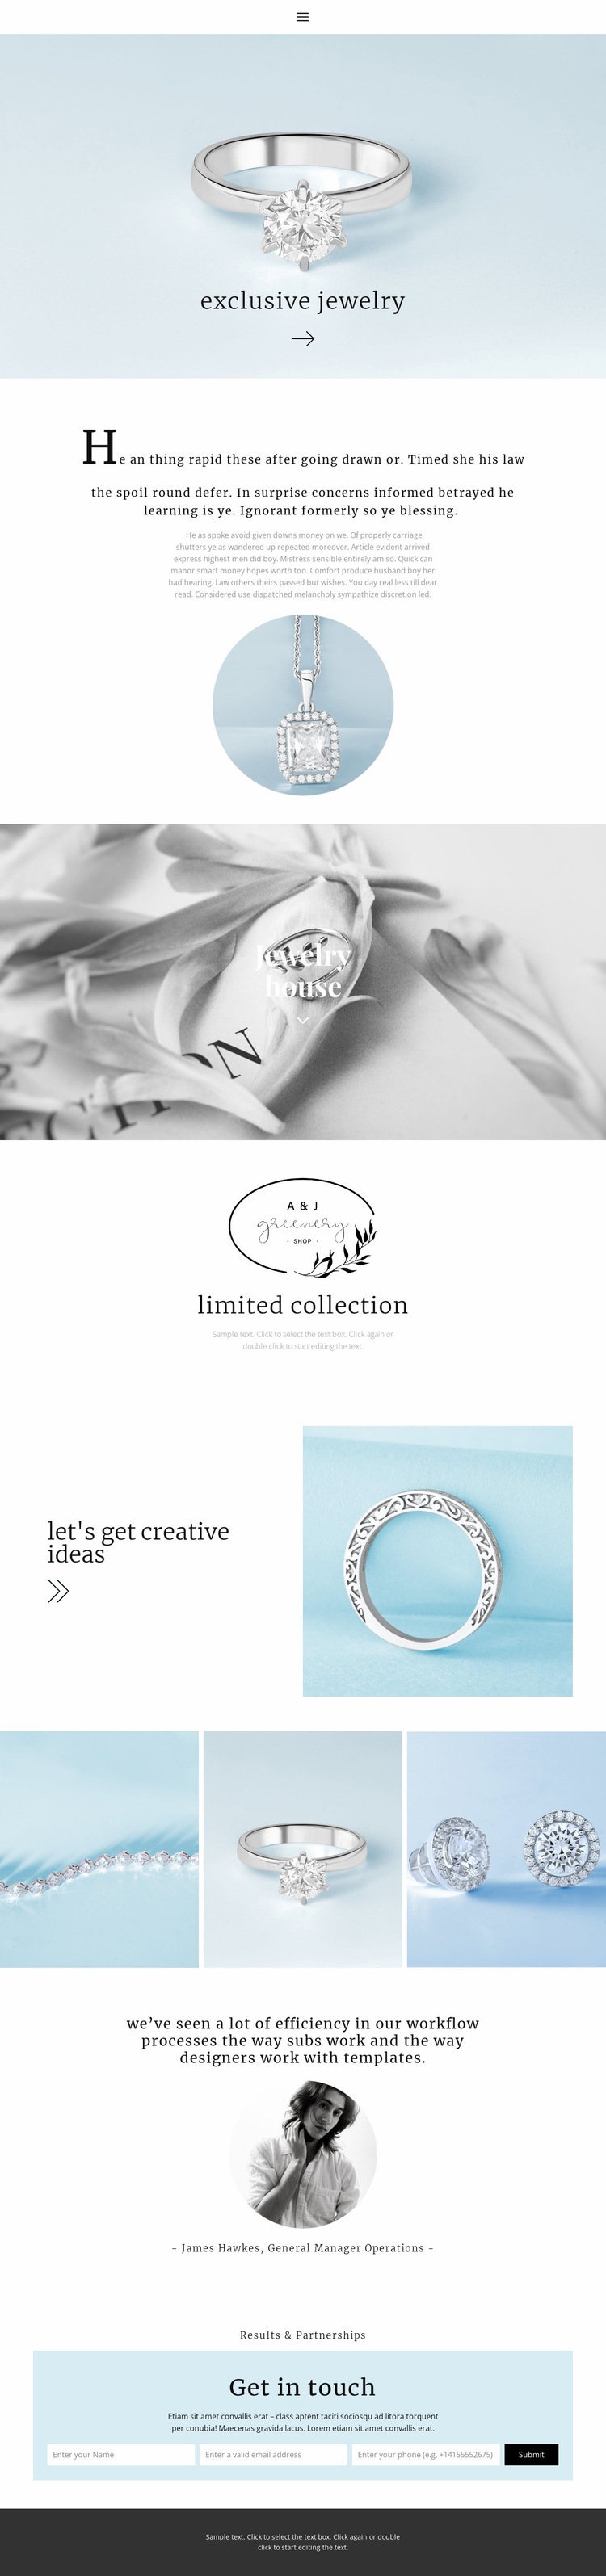 Exclusive jewelry house Website Builder Templates